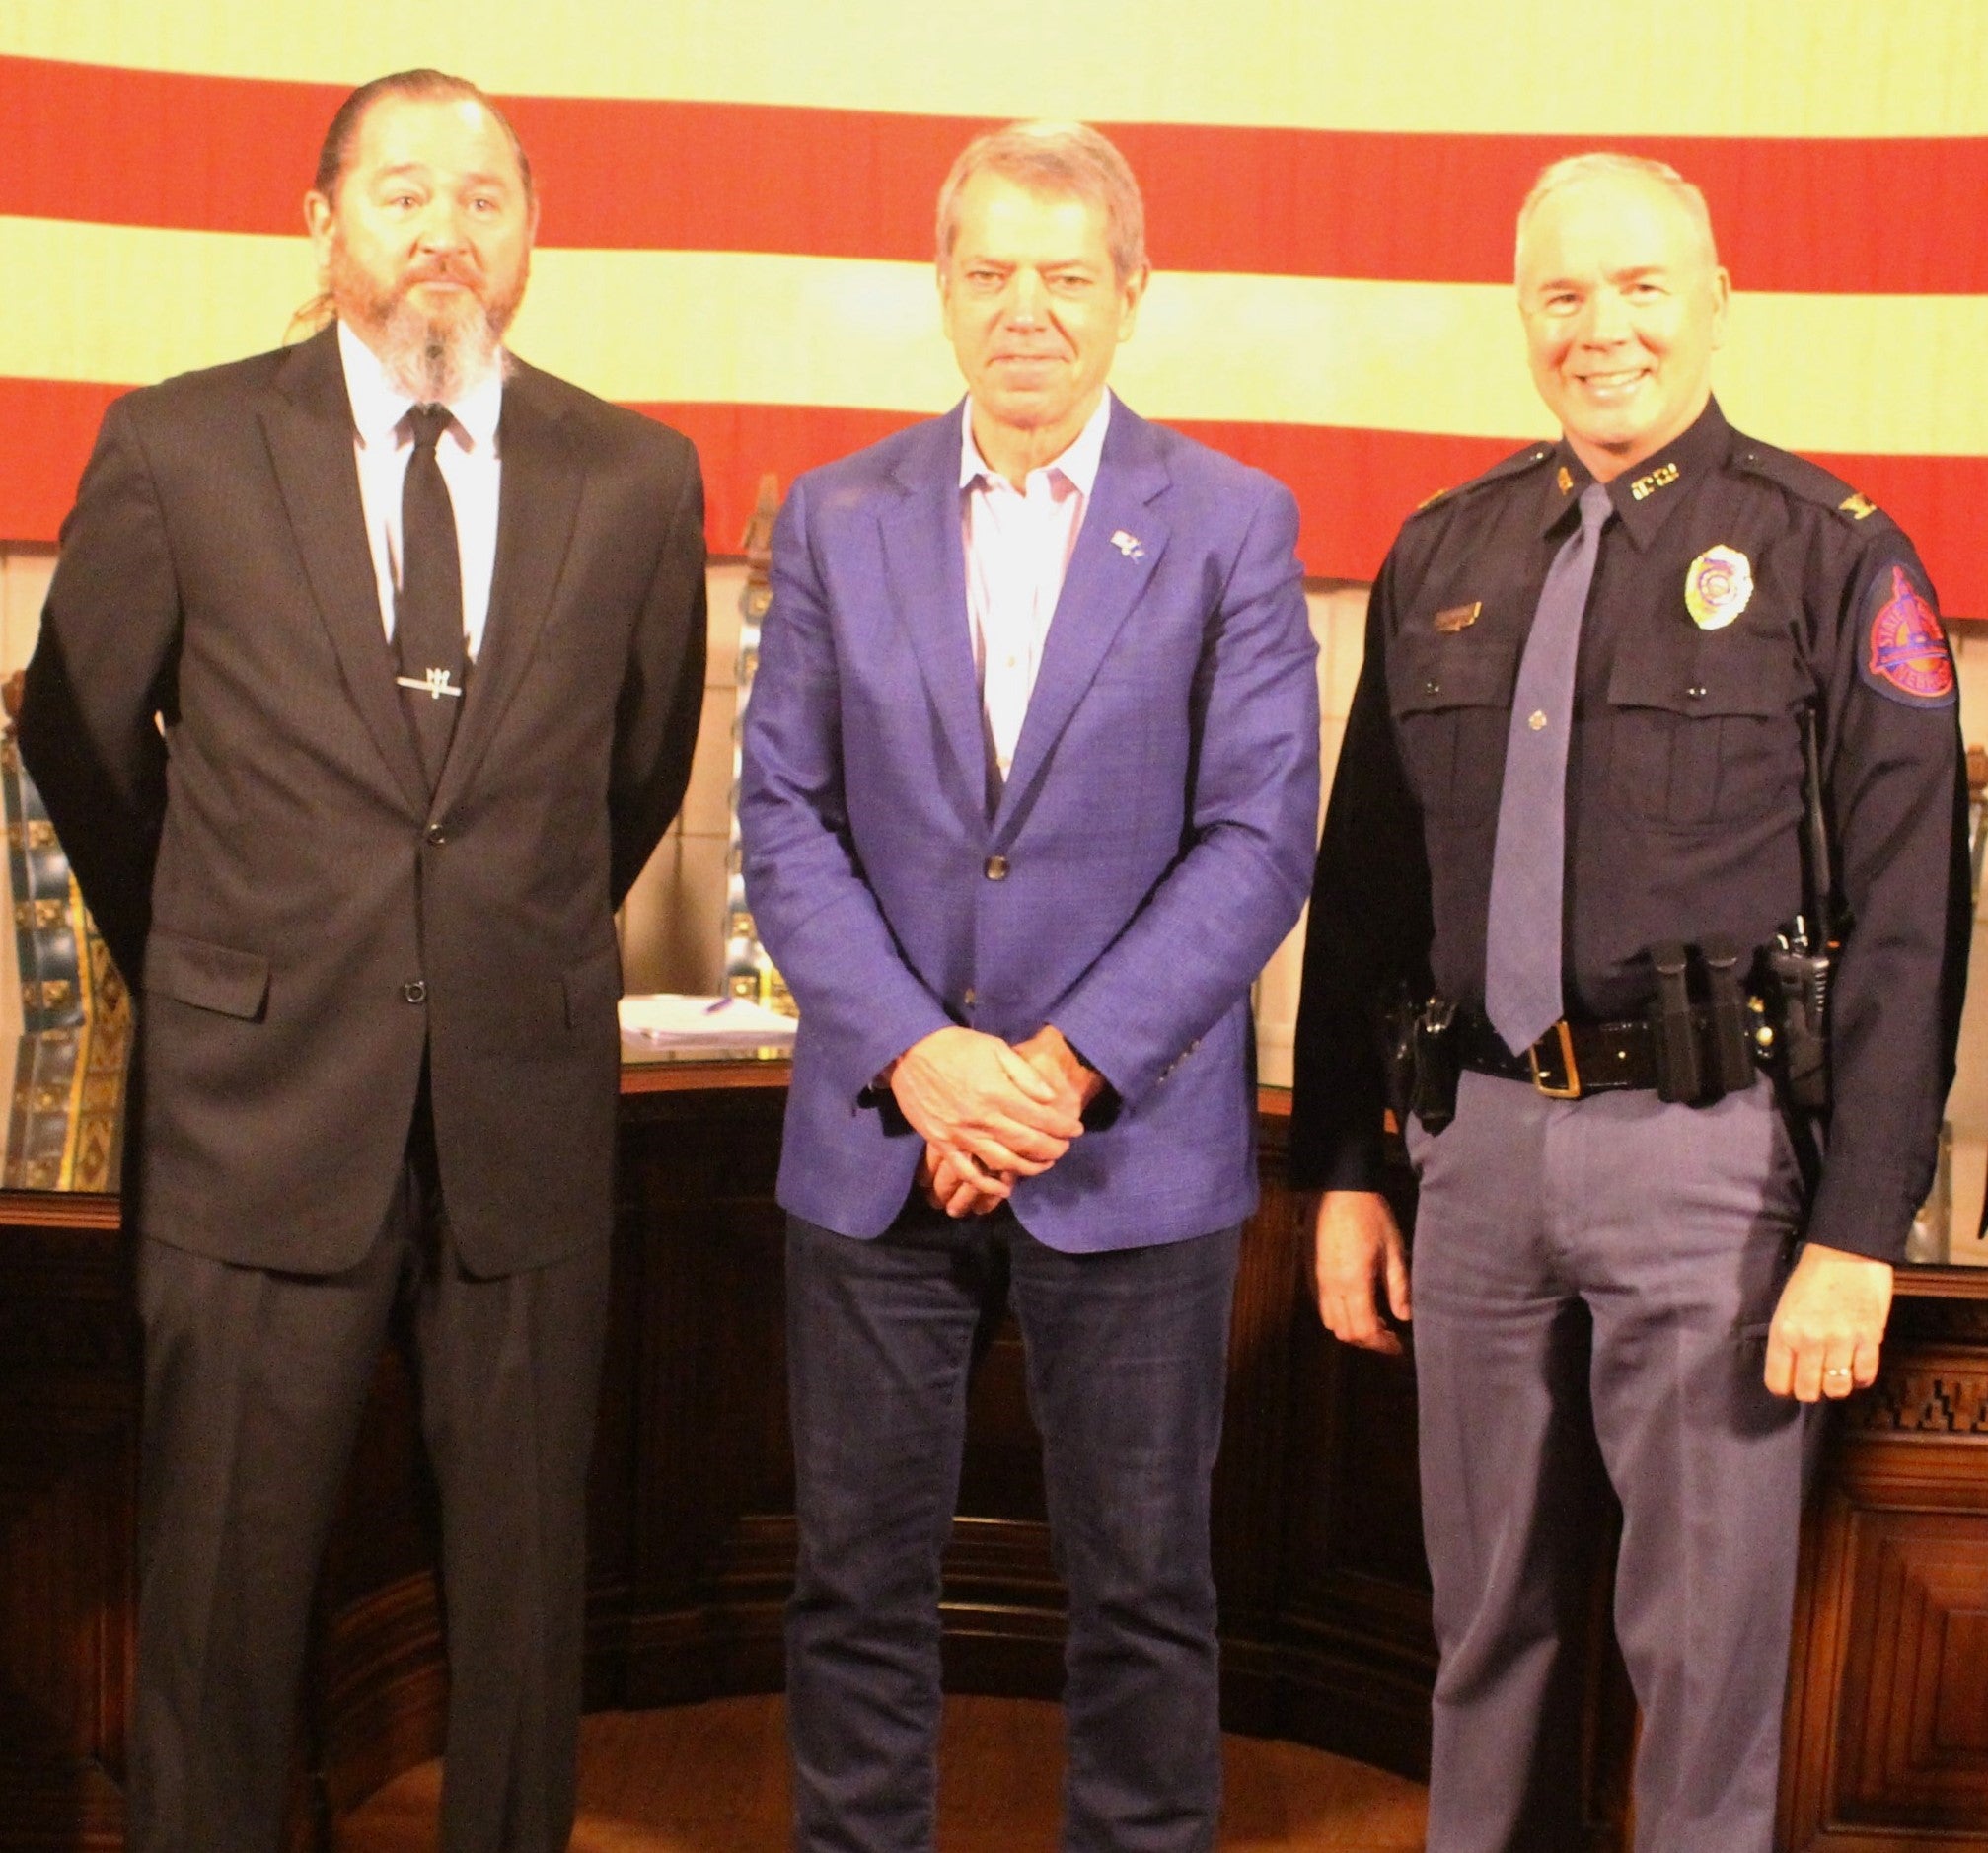 Pictured from left to right: Dan Fiala, President of the State Enforcement Bargaining Council and the State Troopers Association; Governor Jim Pillen; and Colonel John Bolduc, the Superintendent of the Nebraska State Patrol.